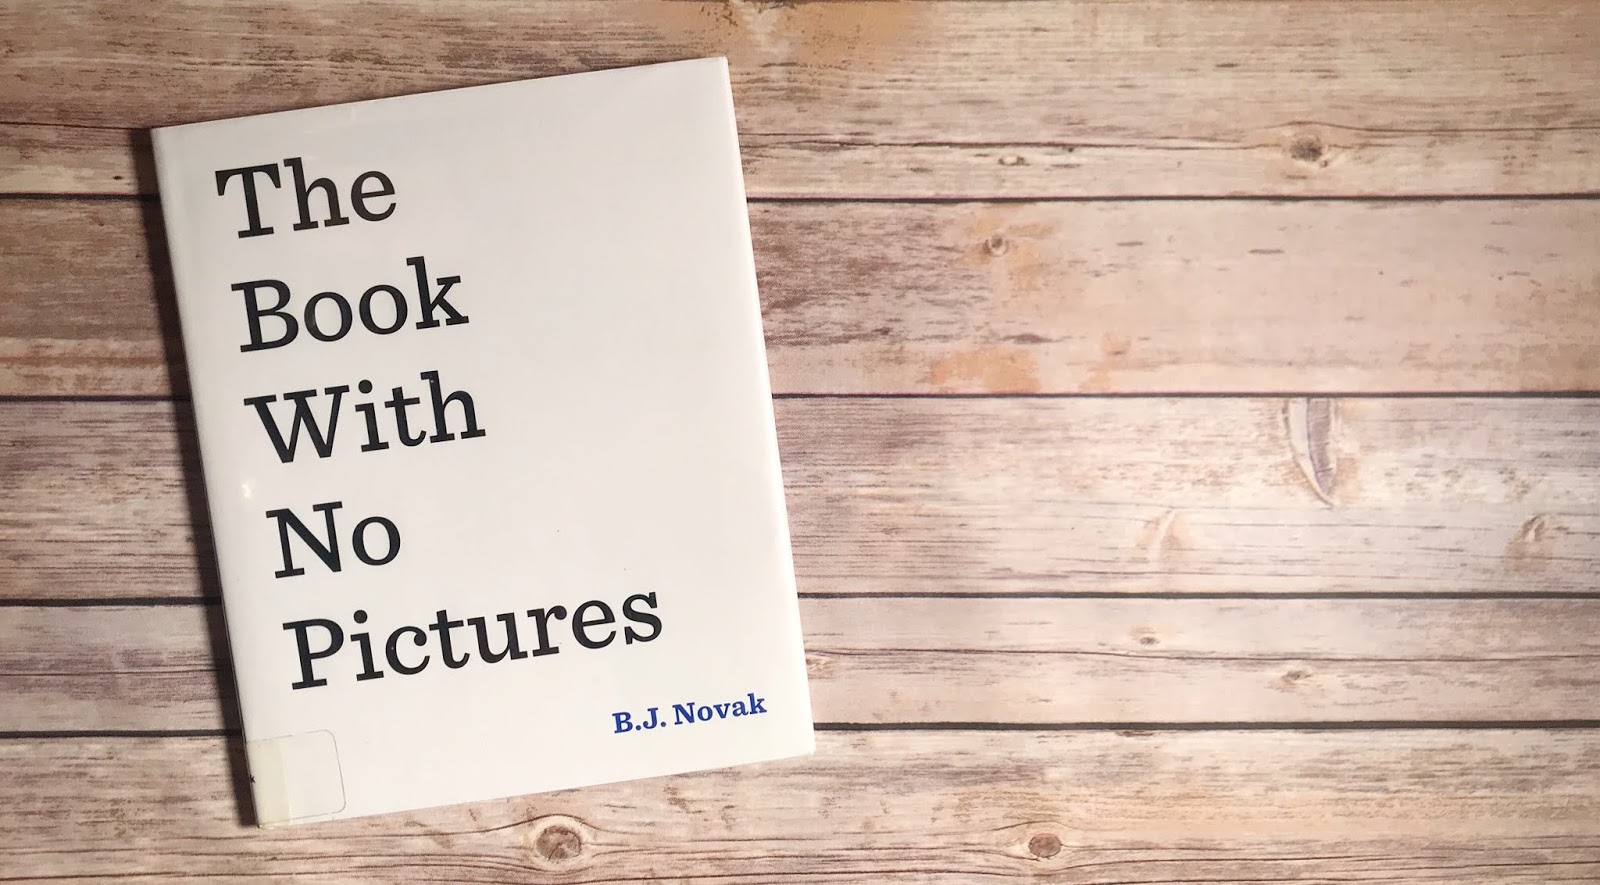 Picture Book with text "The Book with No Pictures" 